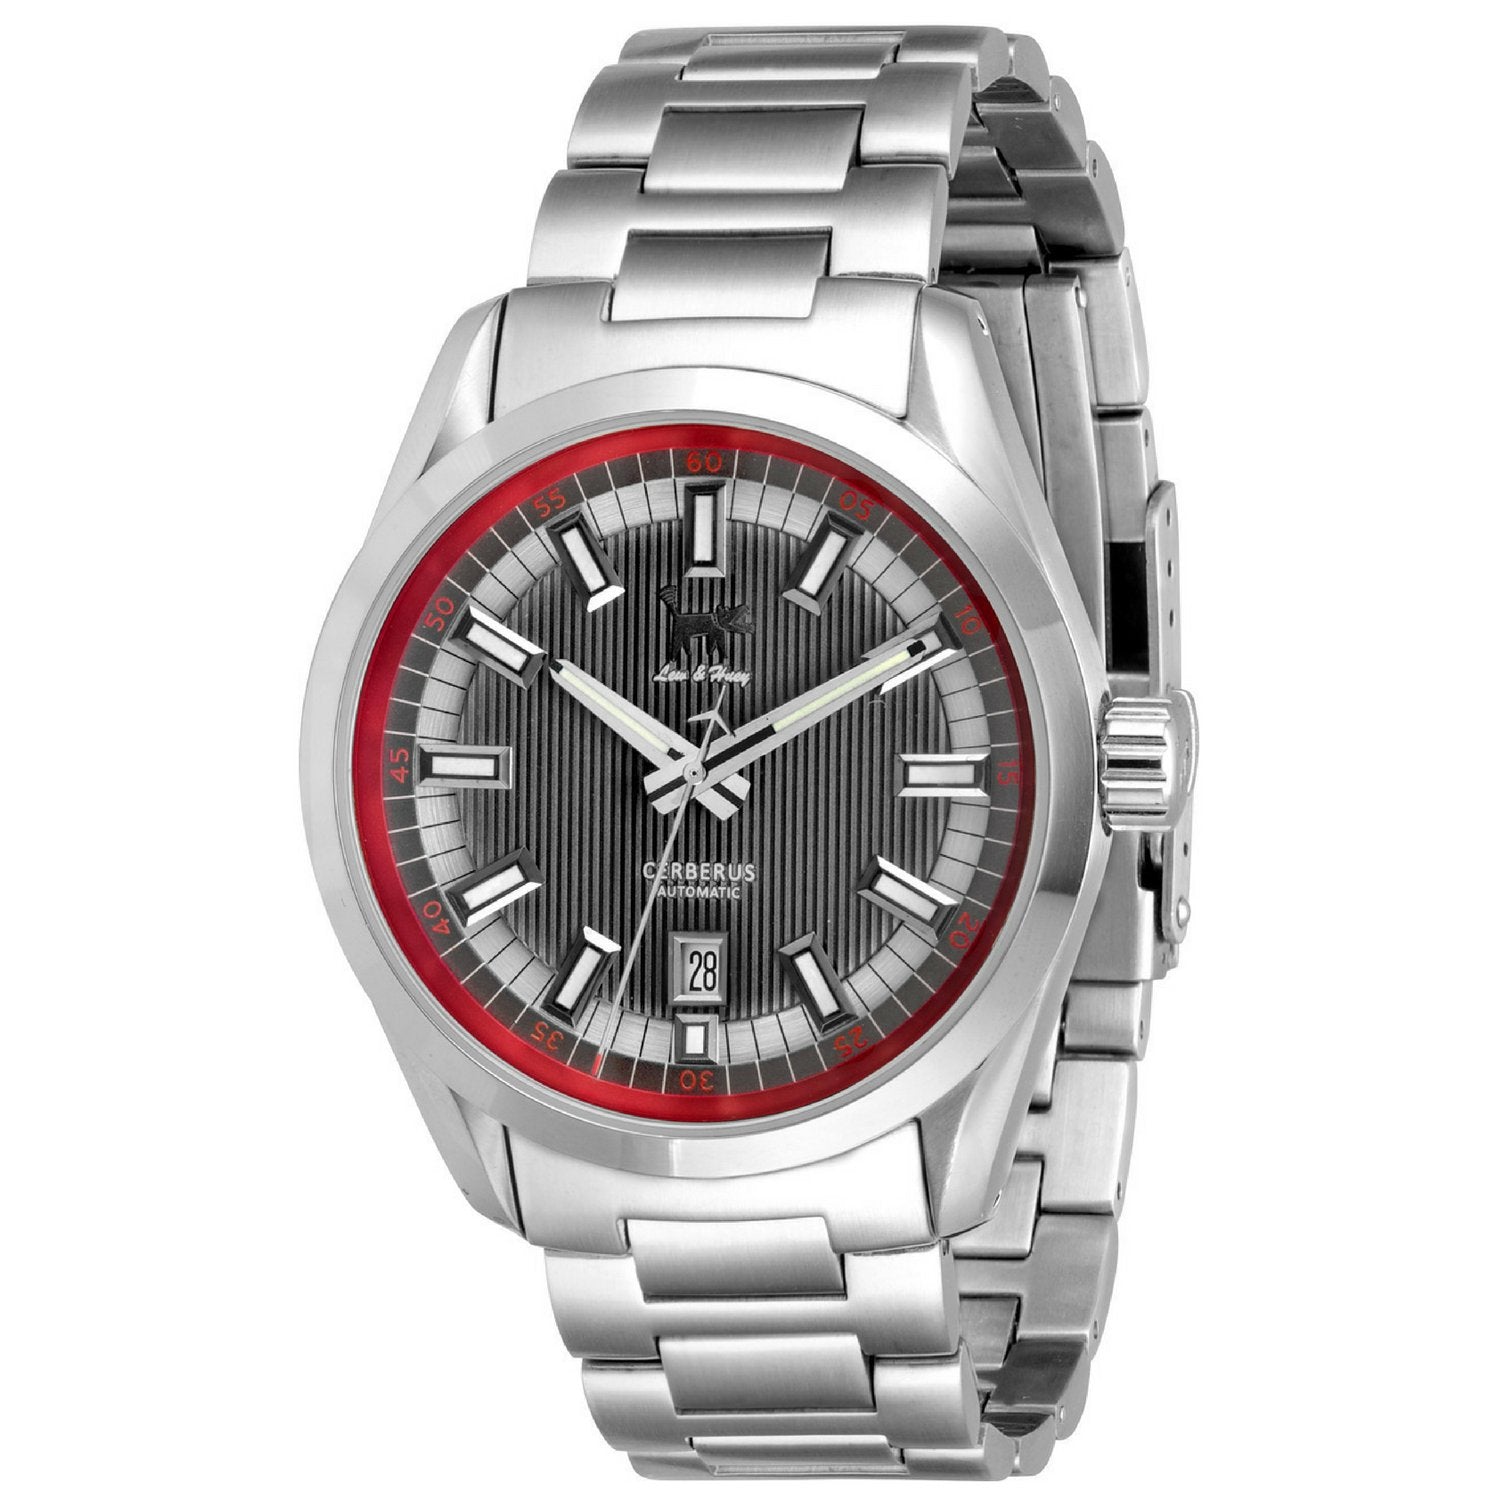 Lew and Huey Cerberus Automatic Watch (Grey & Red)